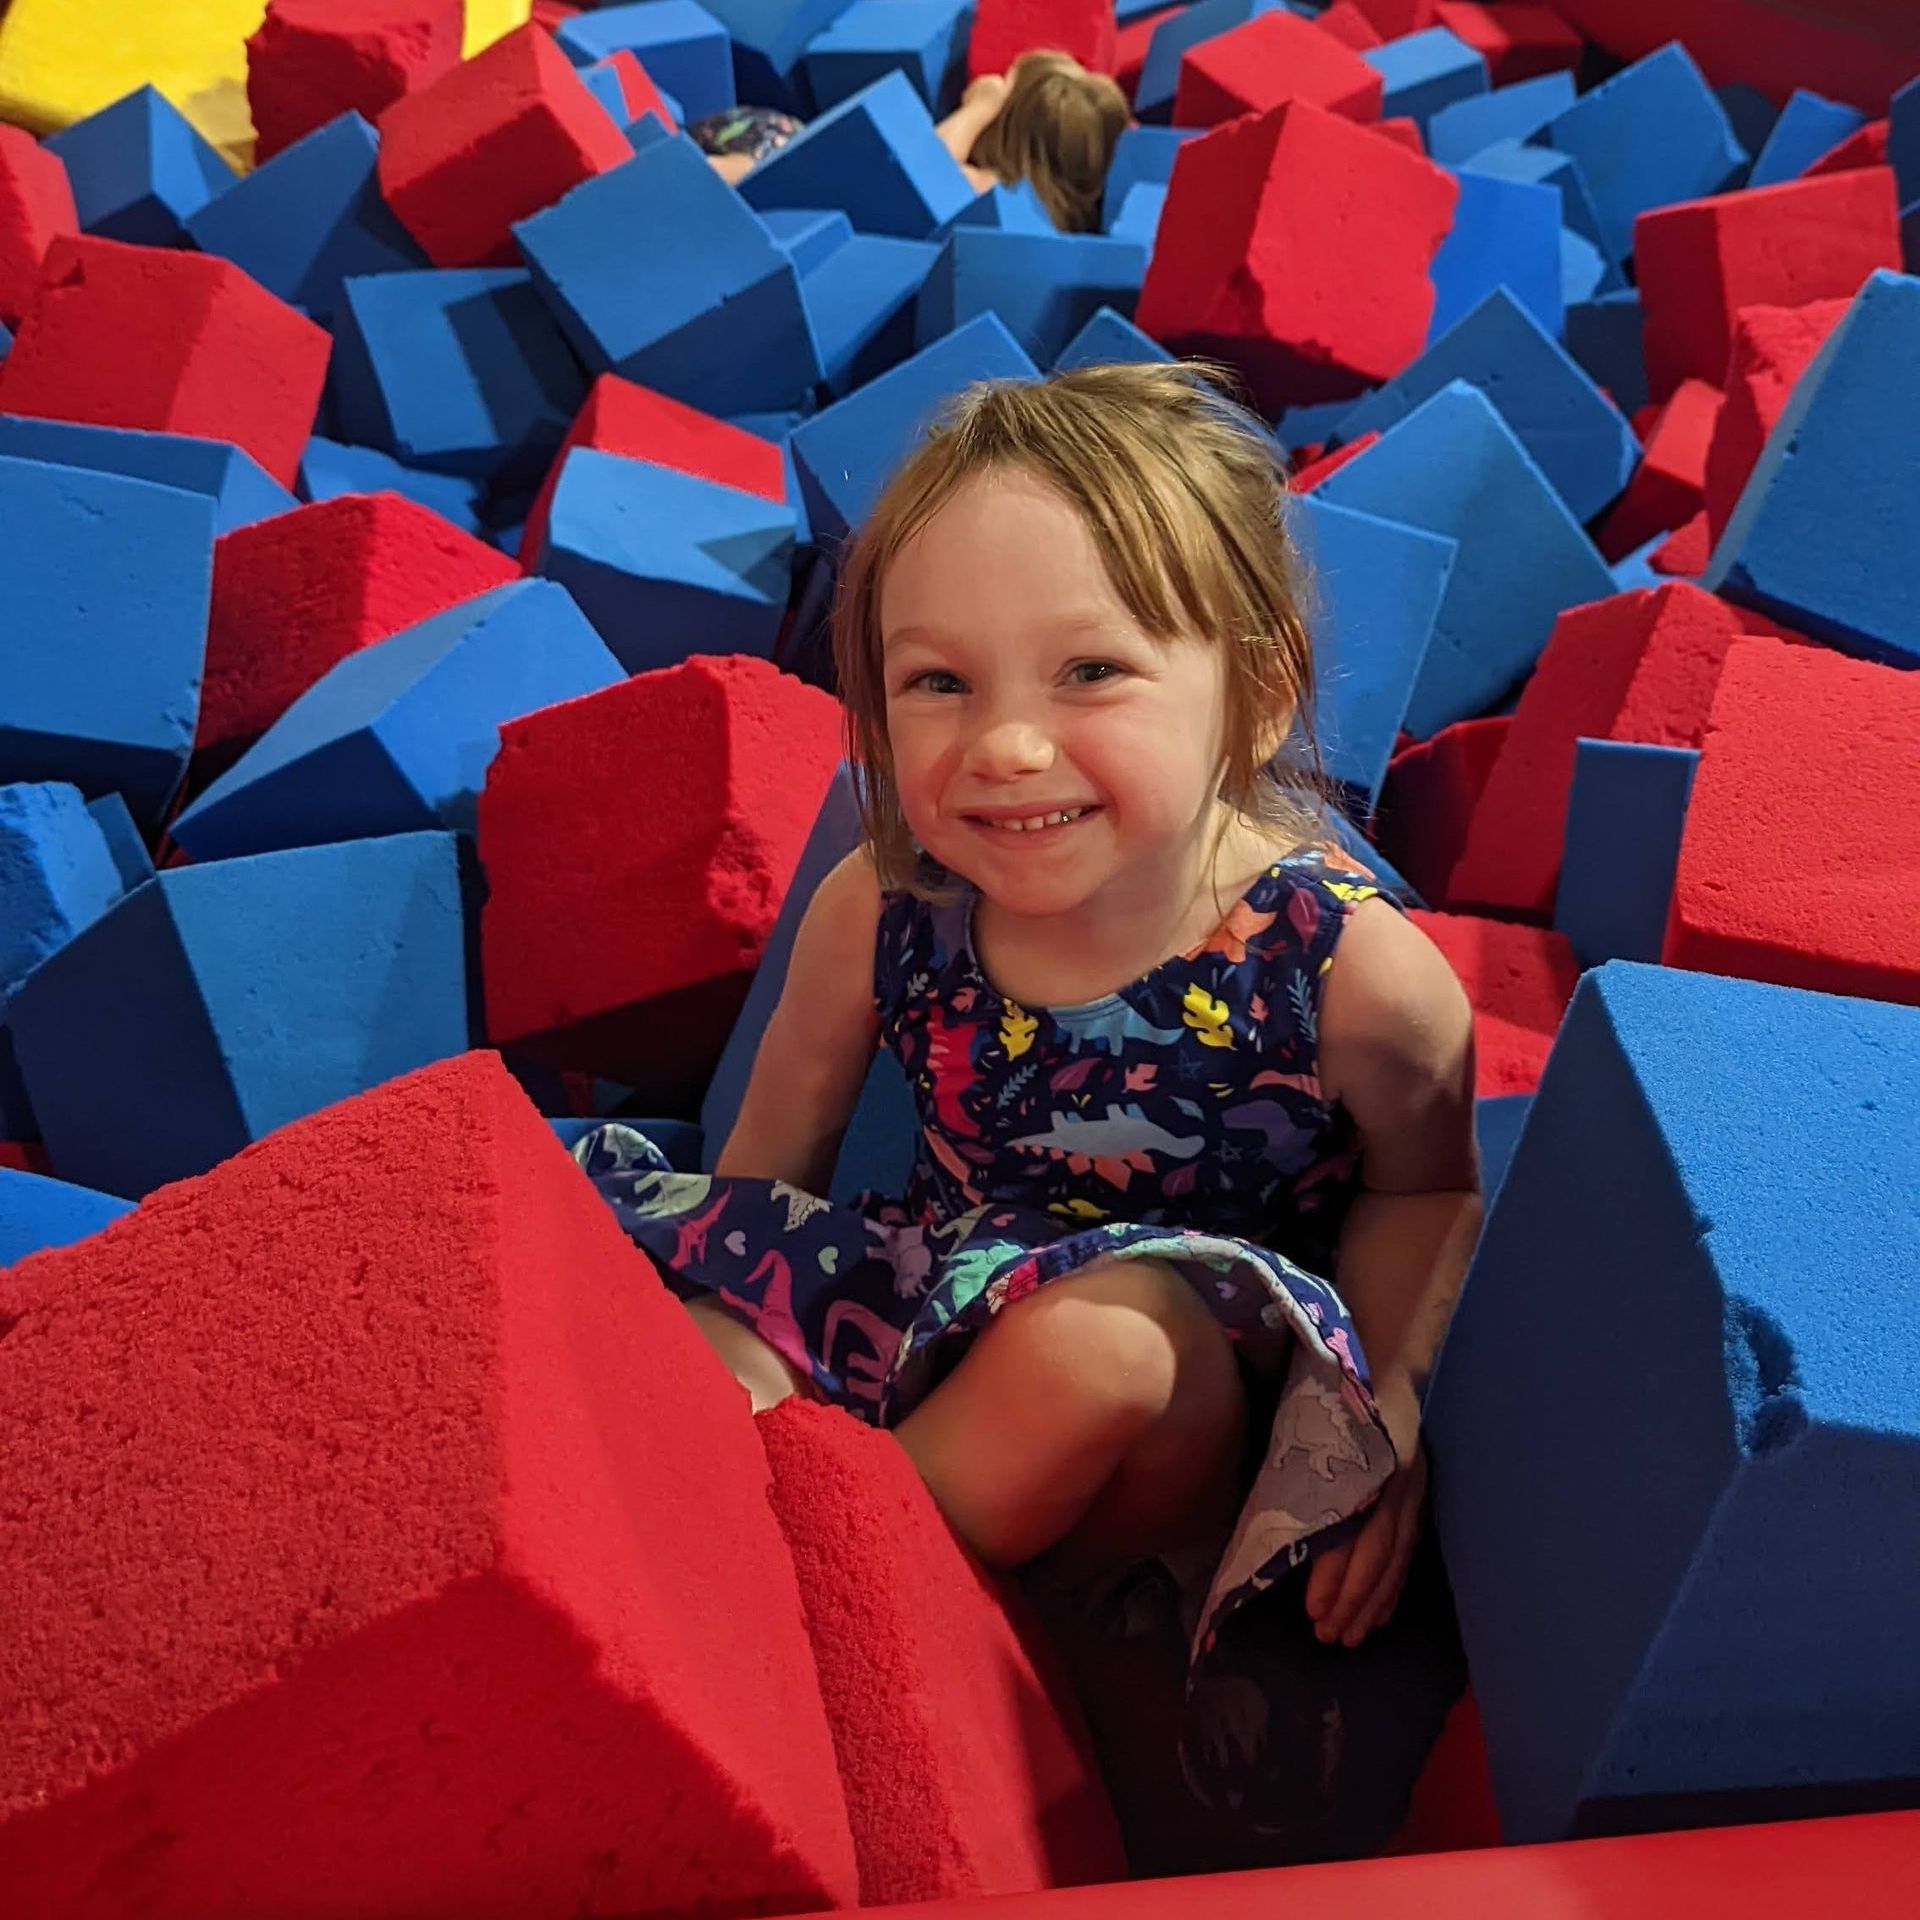 A little girl is sitting in a pile of red and blue foam cubes